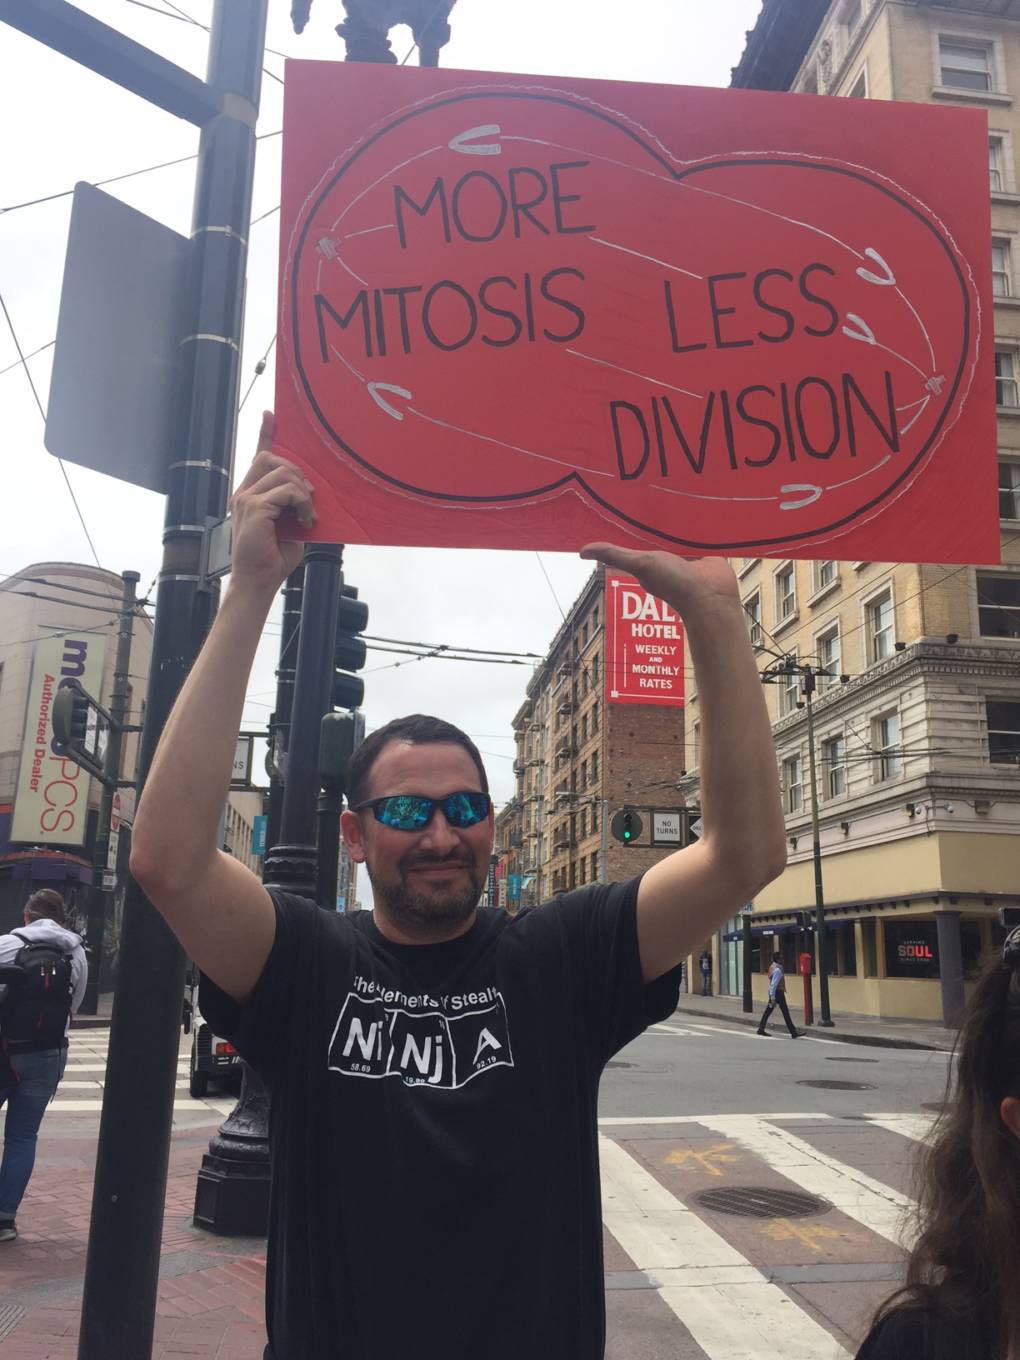 A man holds a sign in Downtown San Francisco that says "More mitosis less division."